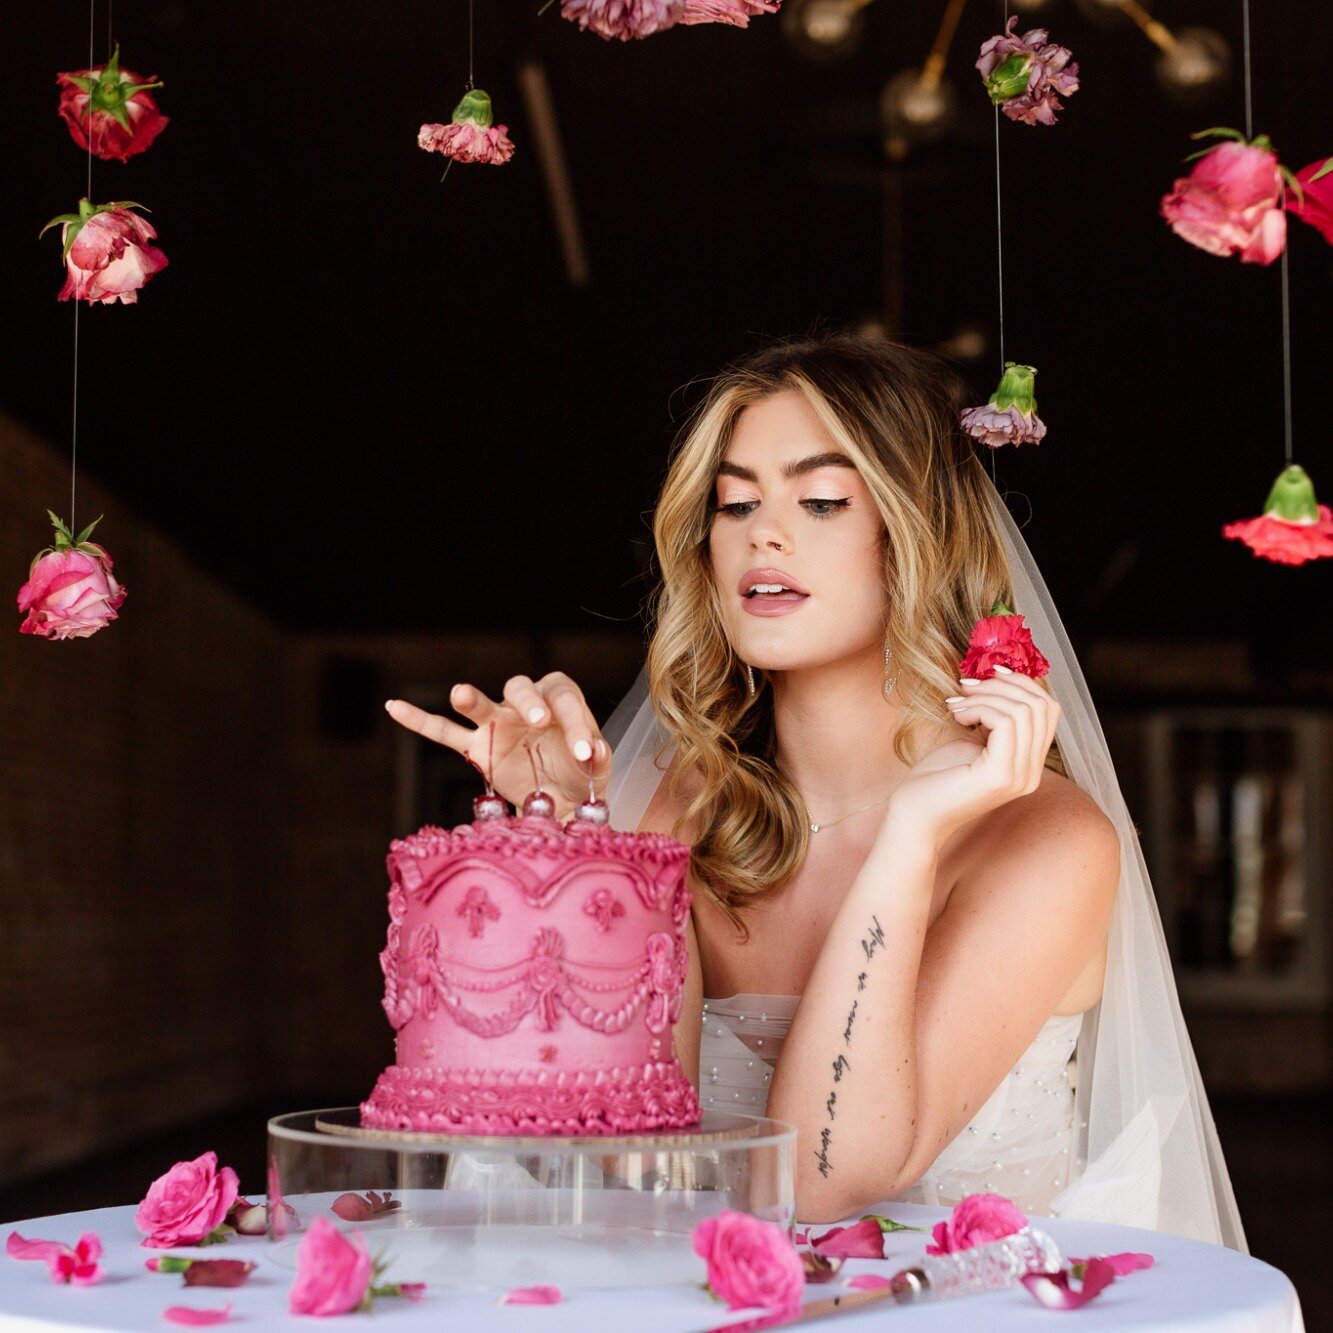 Pinks and roses and hearts - oh my! This vibrantly styled shoot gives us all the Valentine&rsquo;s Day feels 🌹❤️

Happy Valentine's Day from us to you!

Photo/Planning: @verdigrisphotographydesign 
Planning/Design/Decor + Paper Goods: @midwestmeetsd